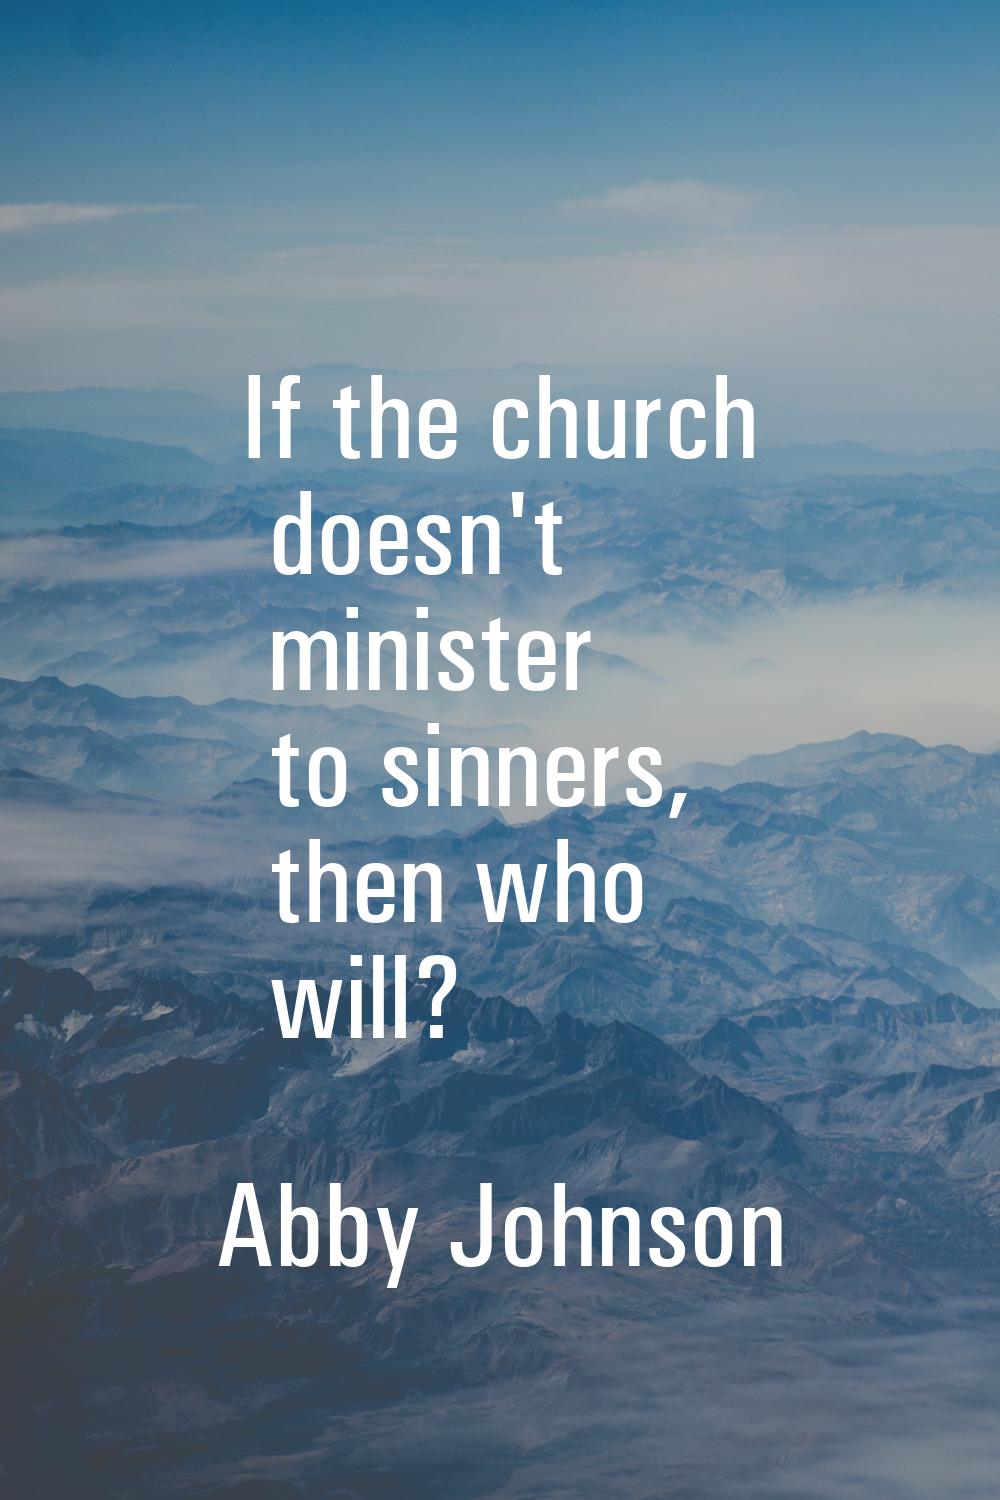 If the church doesn't minister to sinners, then who will?